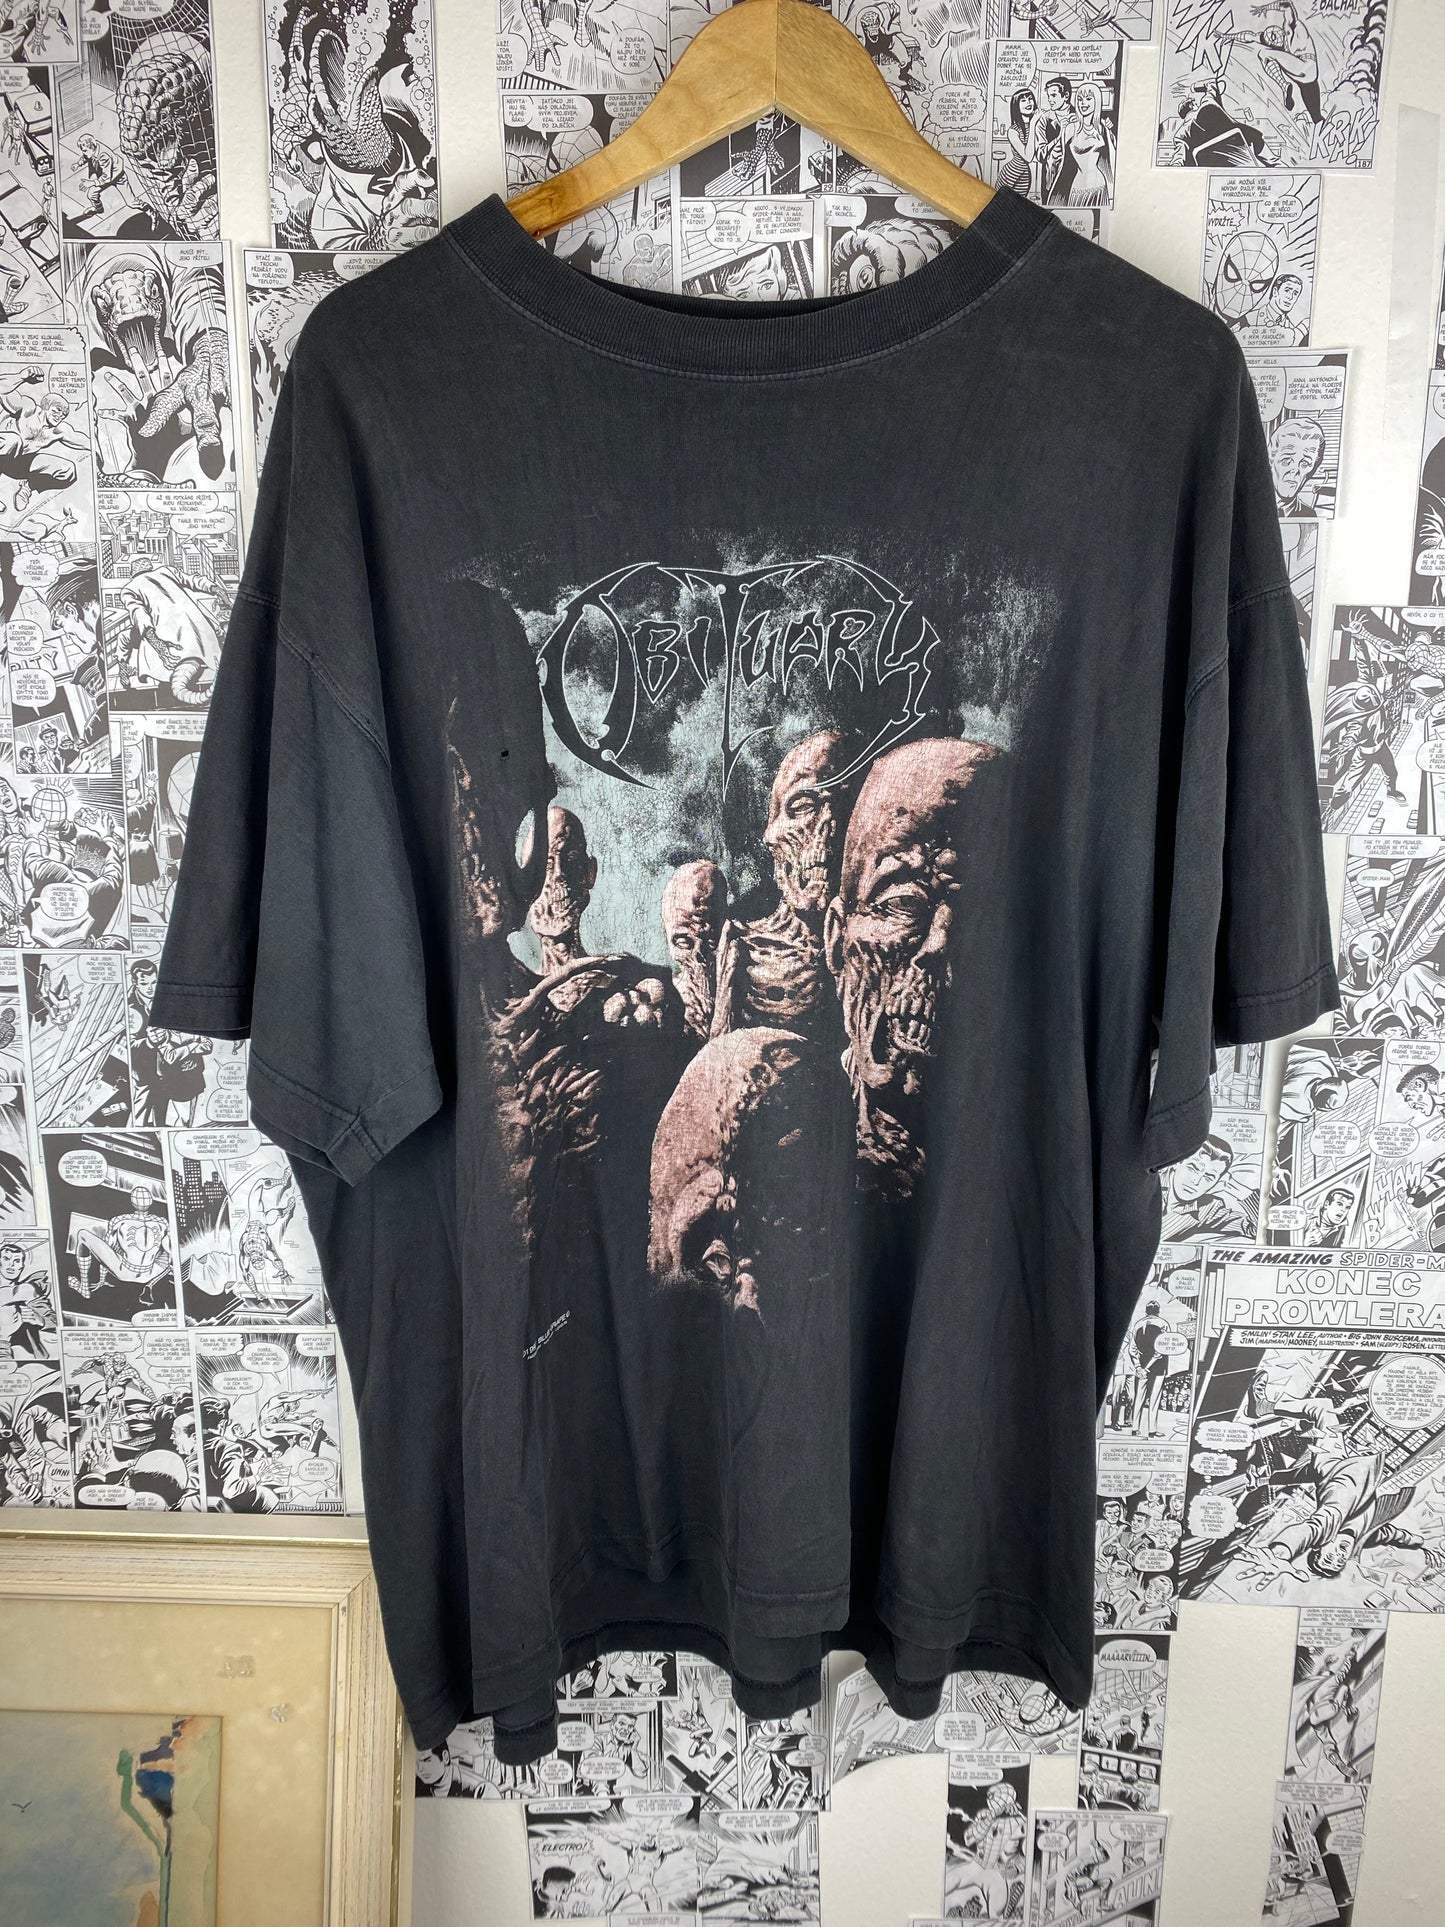 Vintage Obituary “Back from the Dead” 1997 t-shirt - size XL